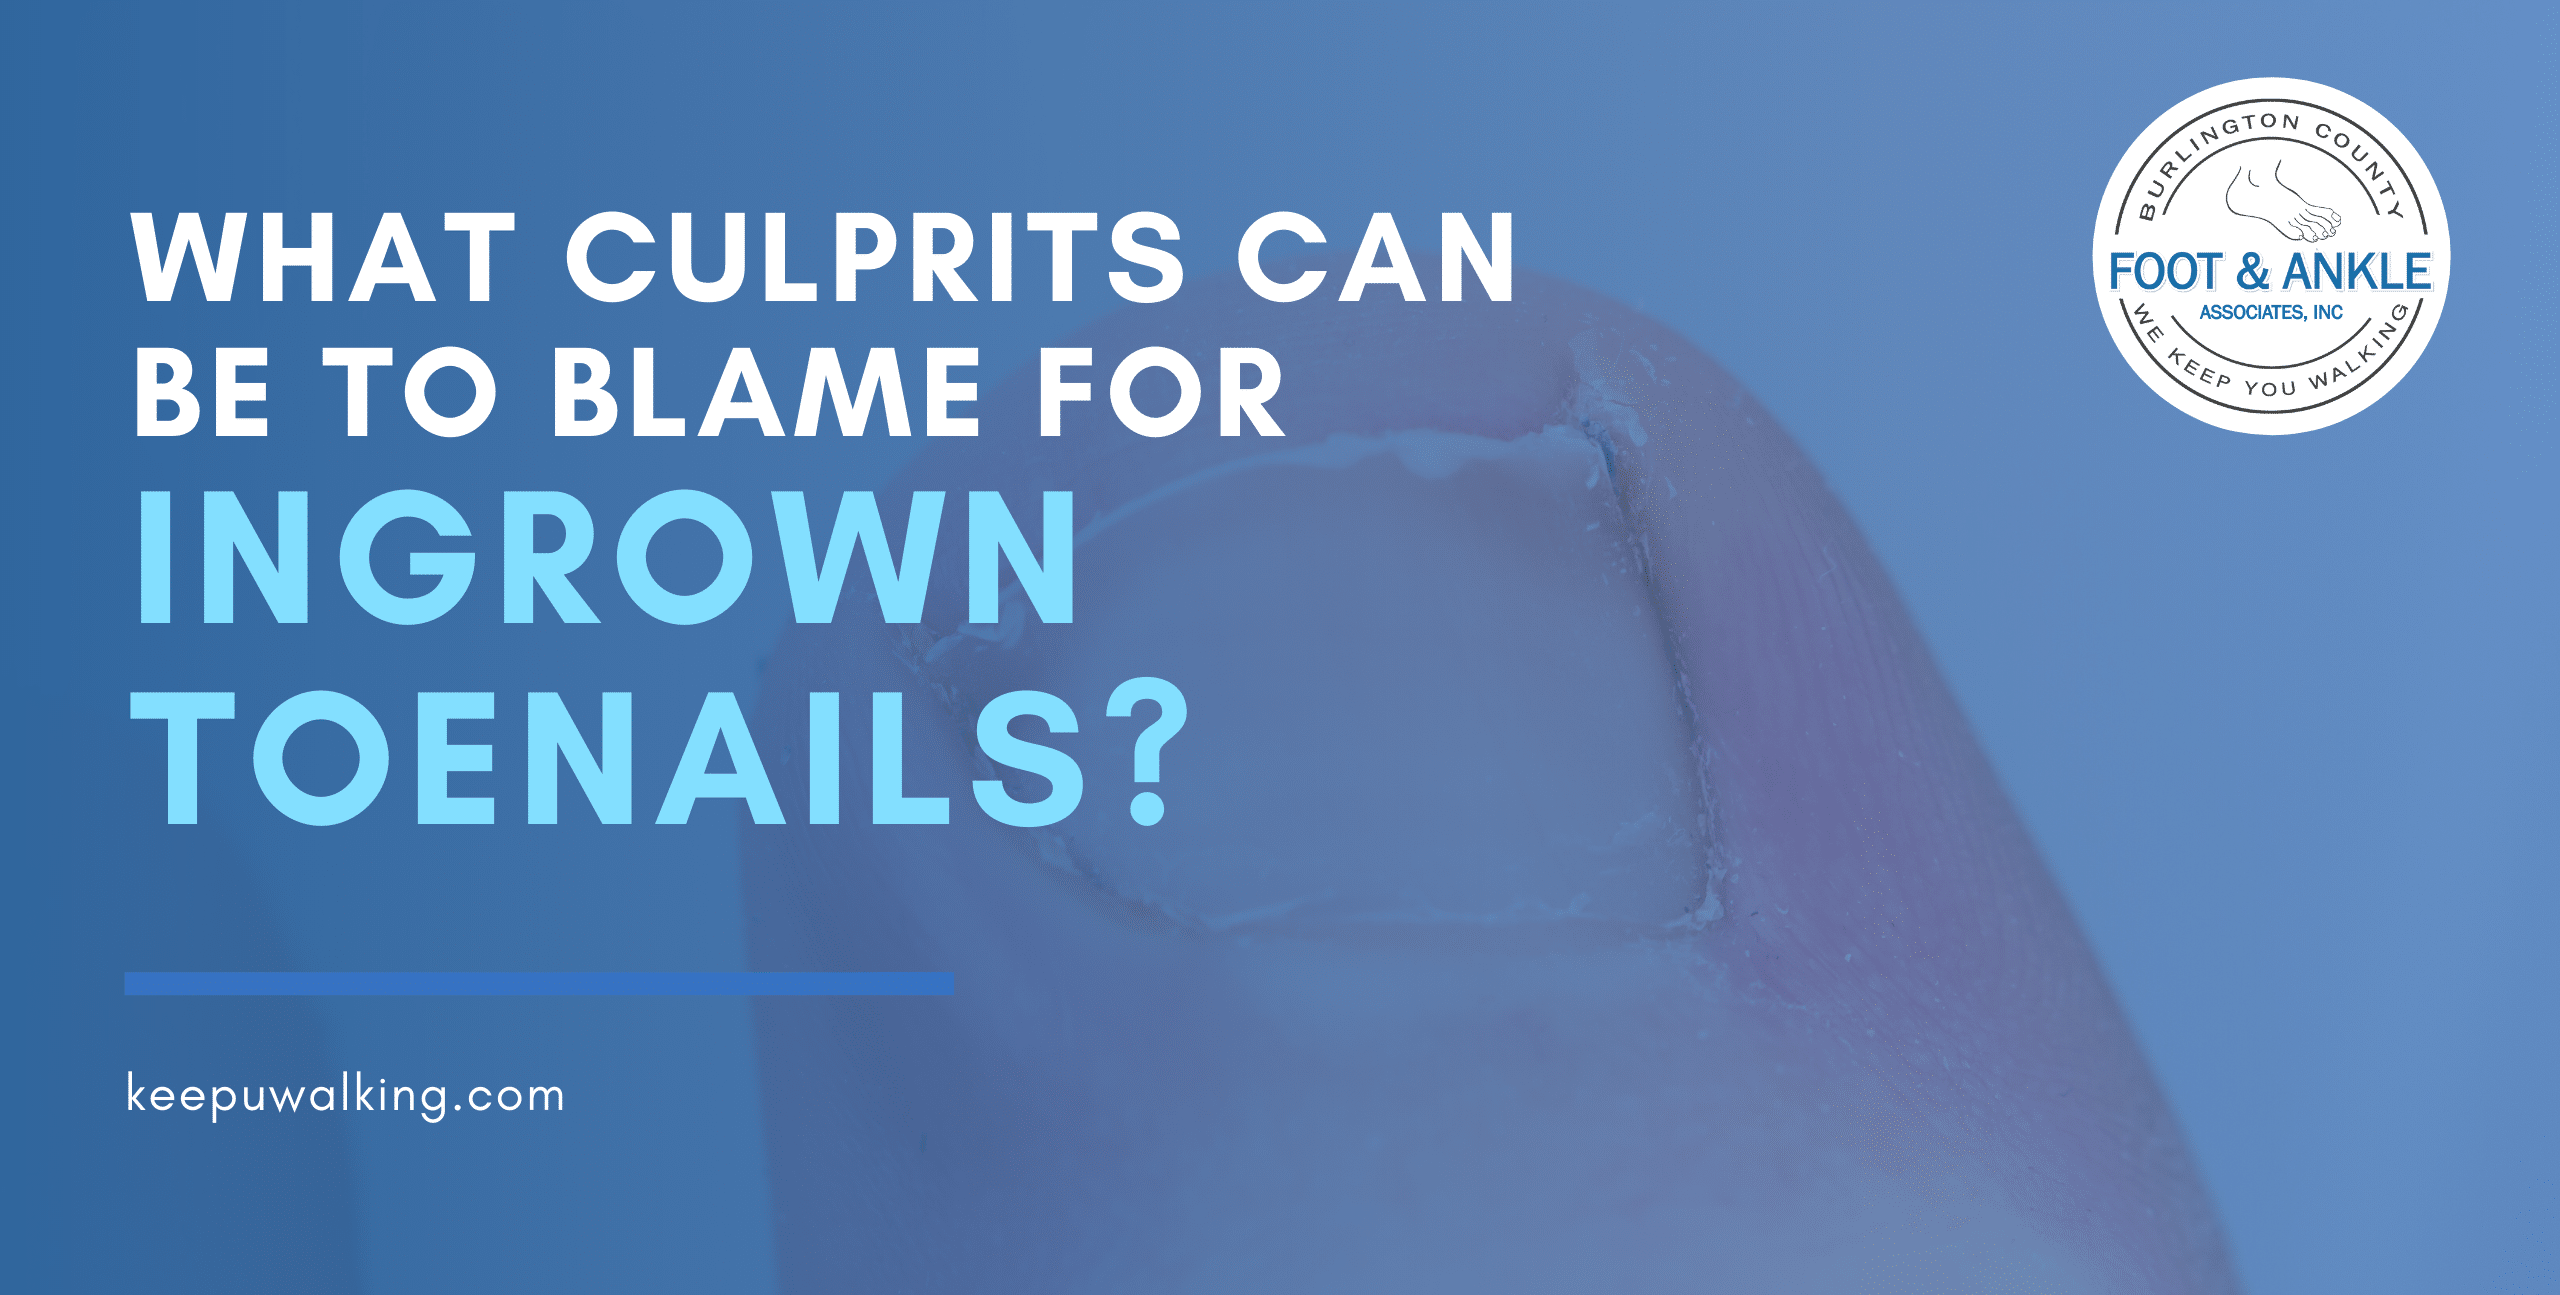 What culprits can be to blame for ingrown toenails?